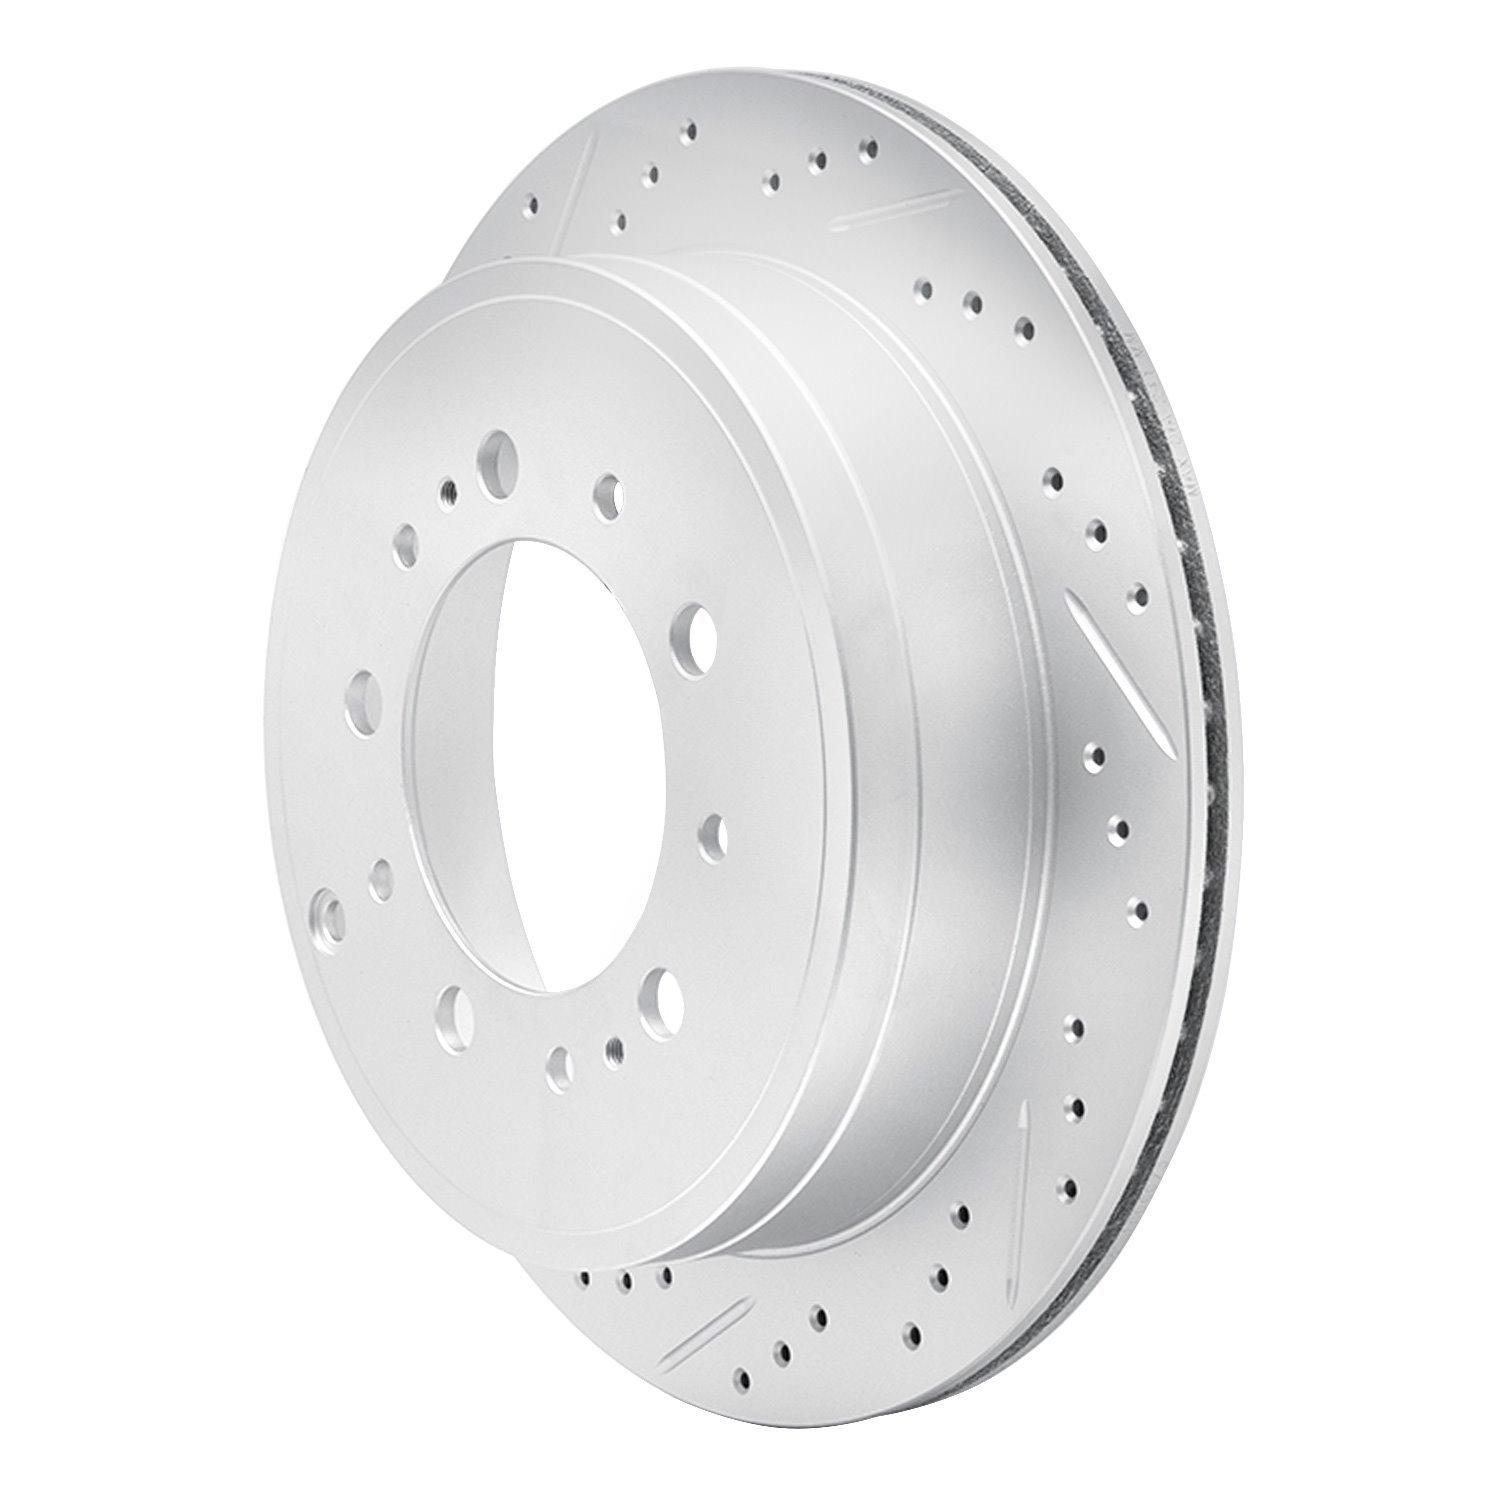 830-76137L Geoperformance Drilled/Slotted Brake Rotor, Fits Select Lexus/Toyota/Scion, Position: Rear Left